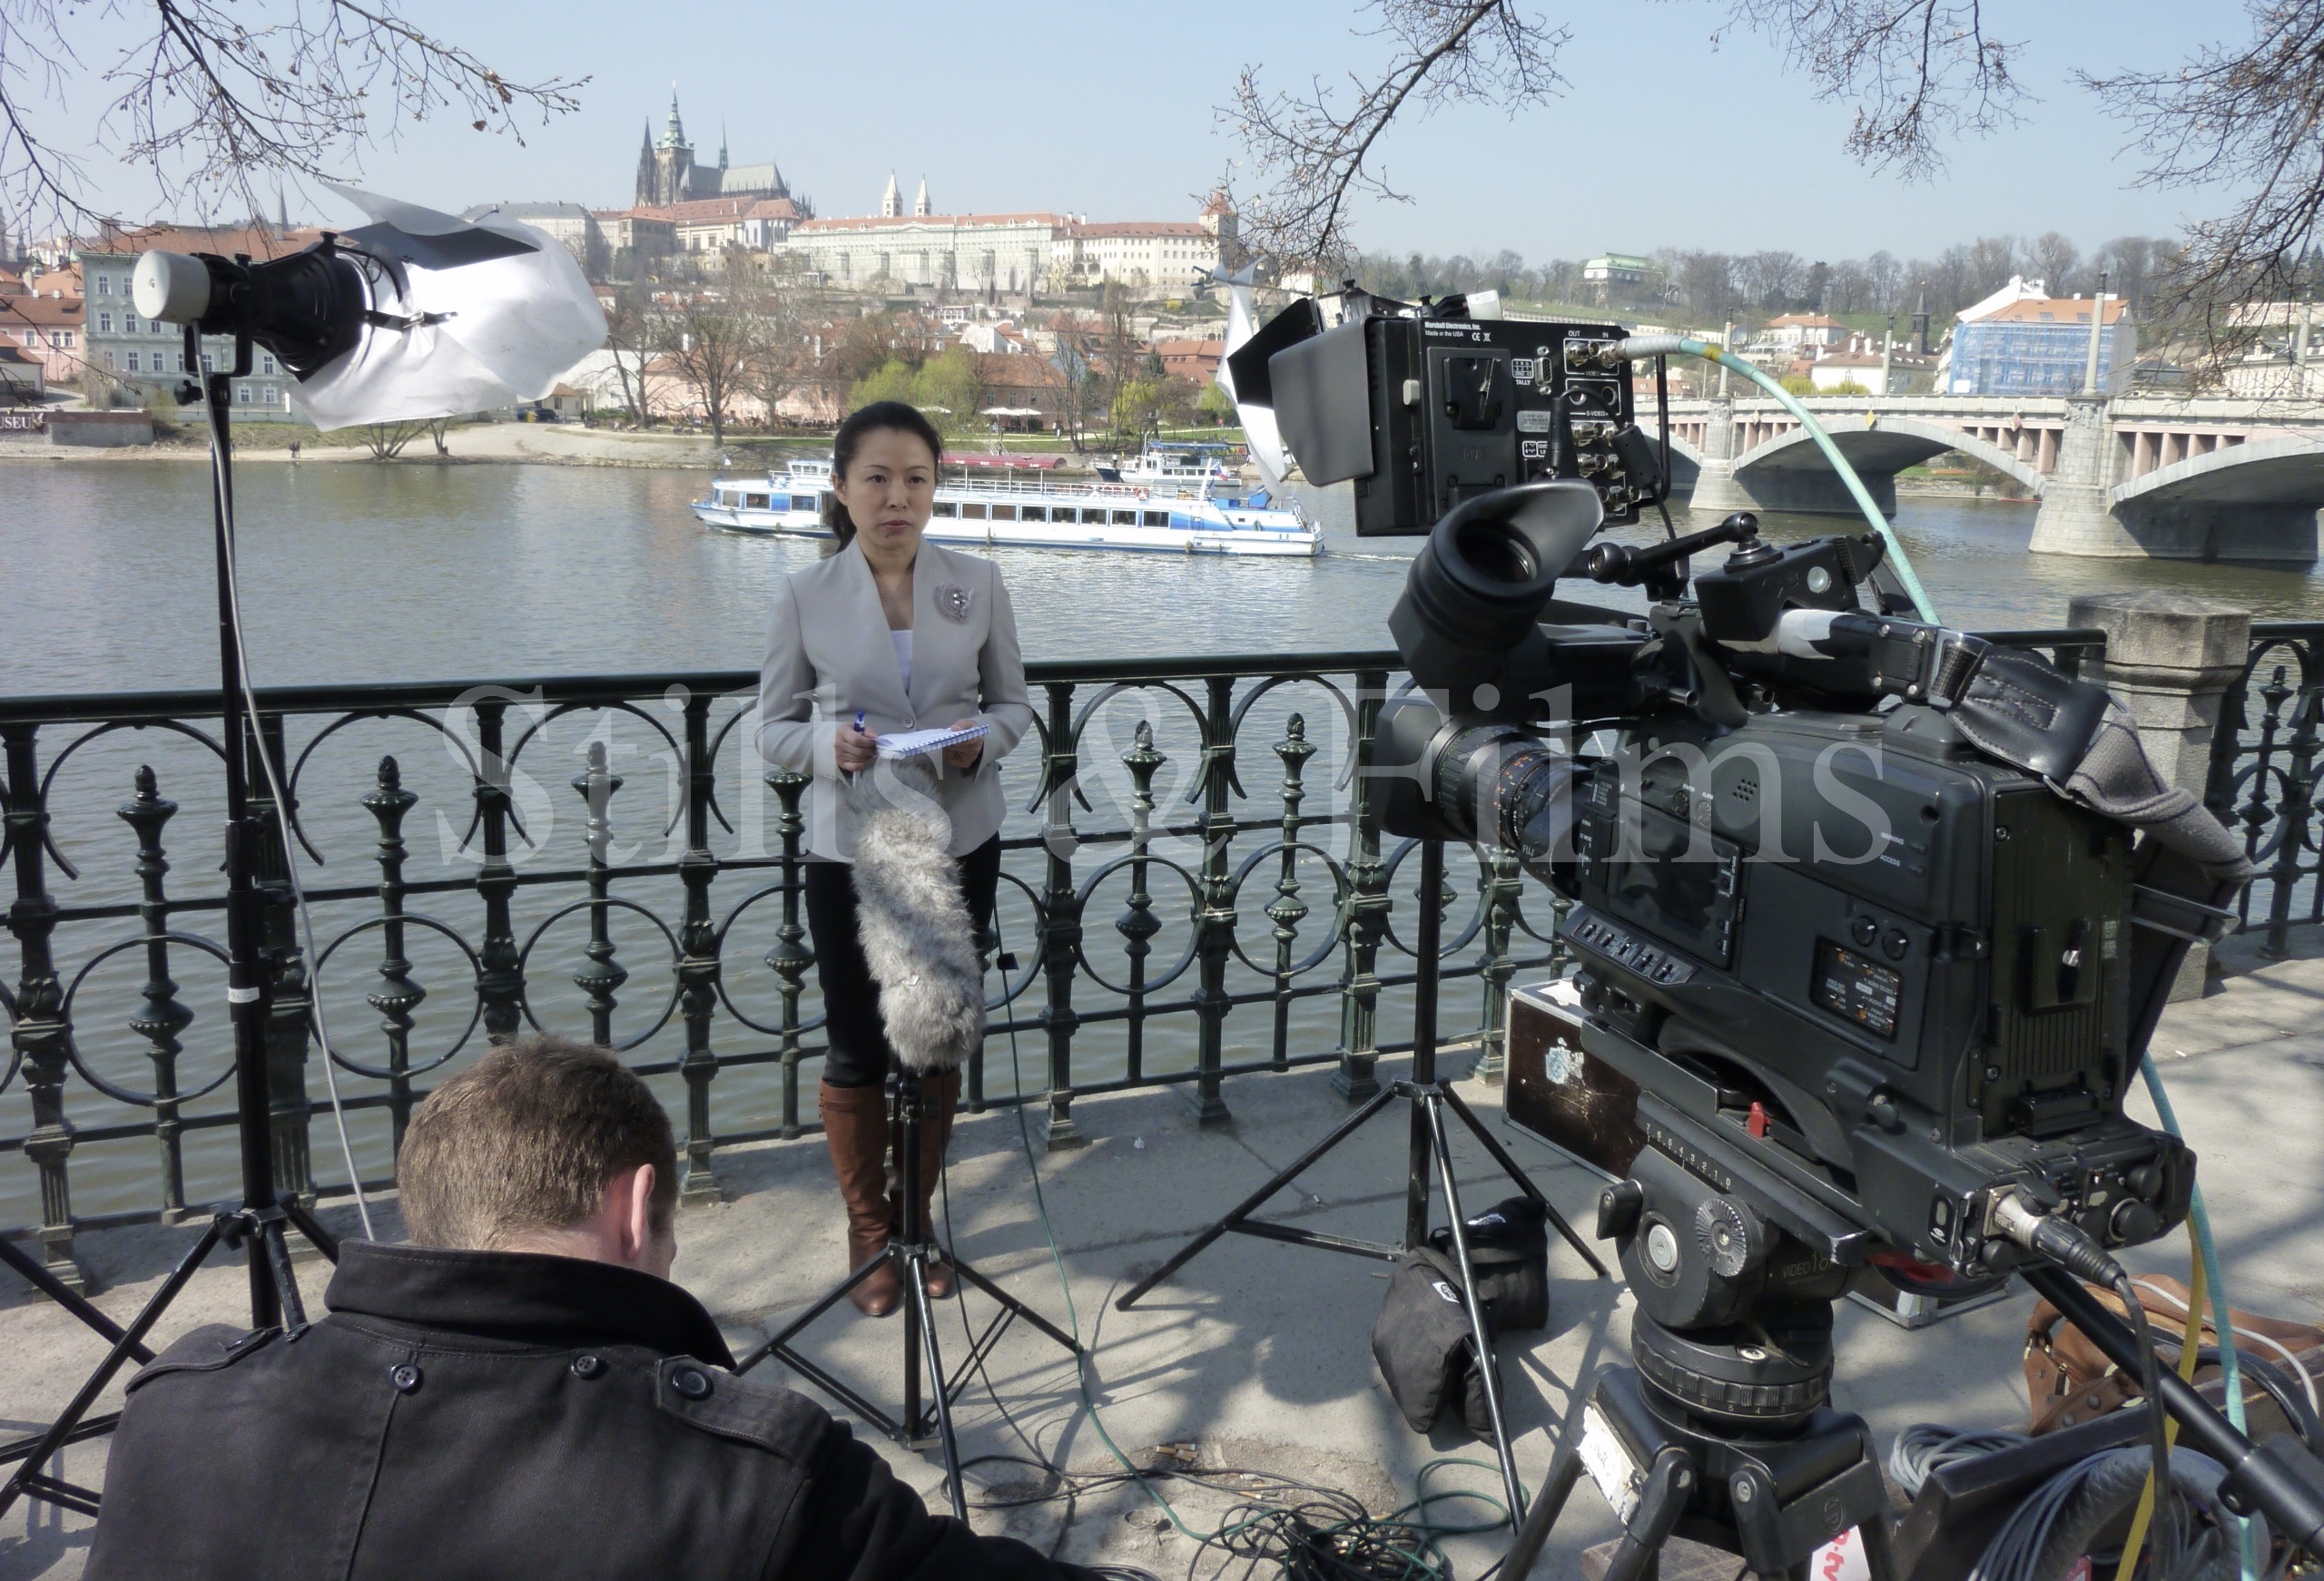 In Prague we provide live or remote video production services for clients using the latest live IP technologies.